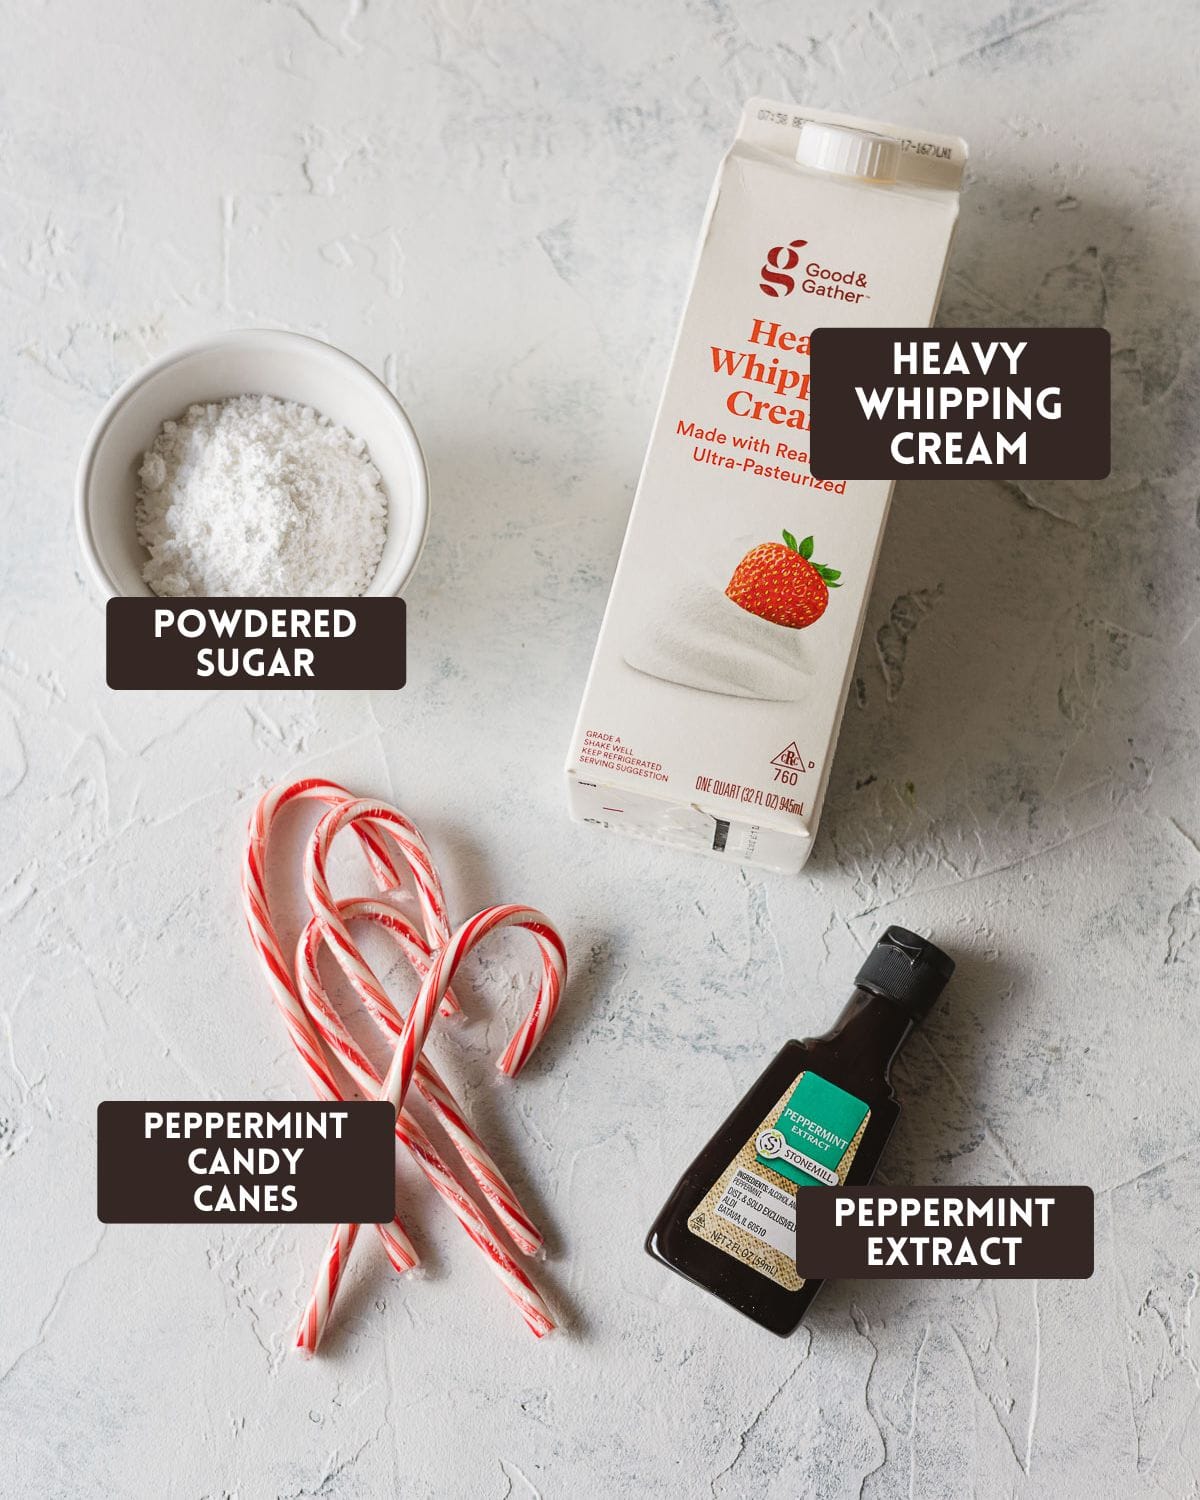 Labeled ingredients for candy cane whipped cream: powdered sugar, heavy whipping cream, peppermint candy canes, peppermint extract.